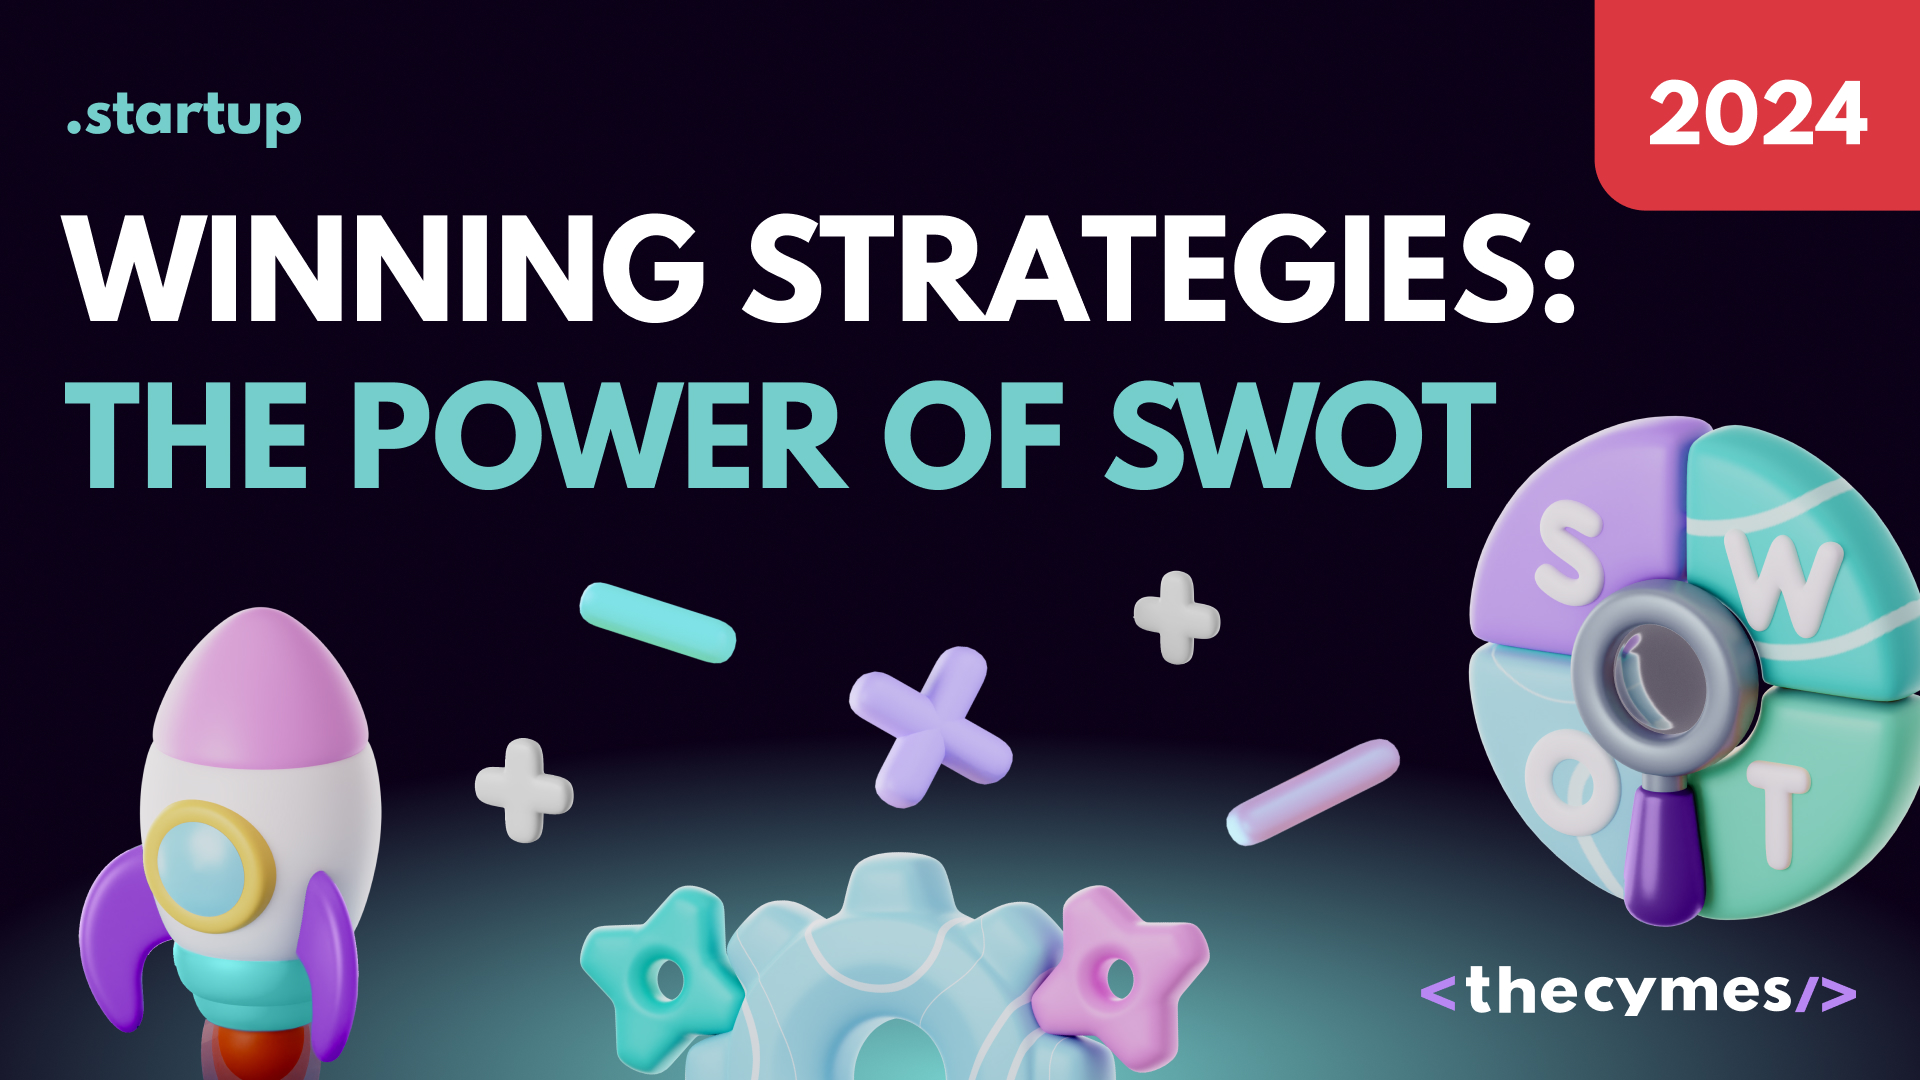 Winning Strategies for 2024: The Power of SWOT cover